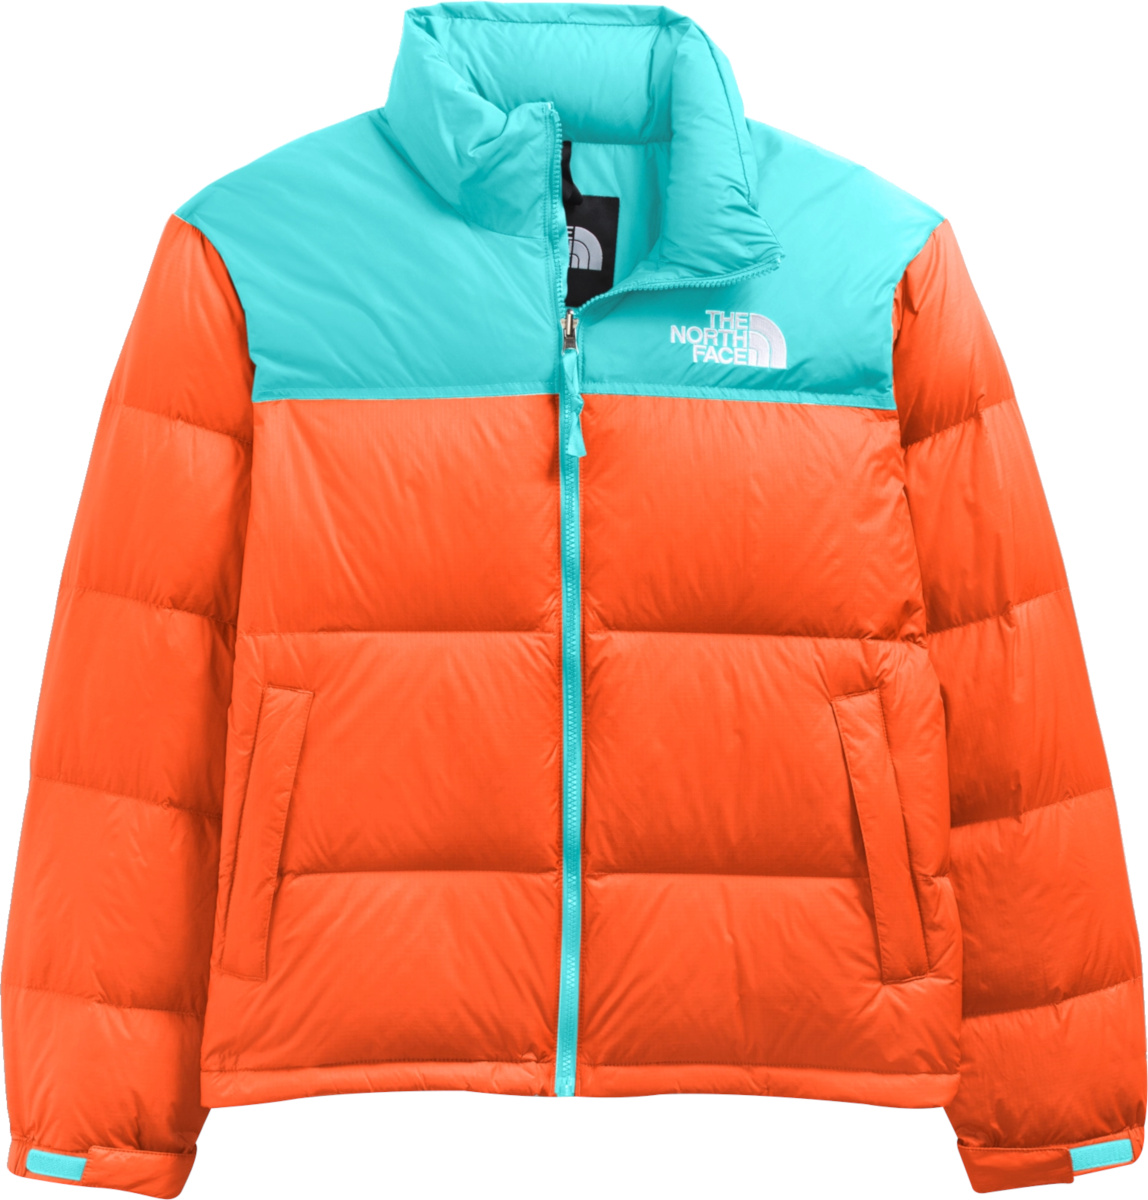 The North Face Orange & Turquoise '1996 Nuptse' Puffer Jacket |  Incorporated Style